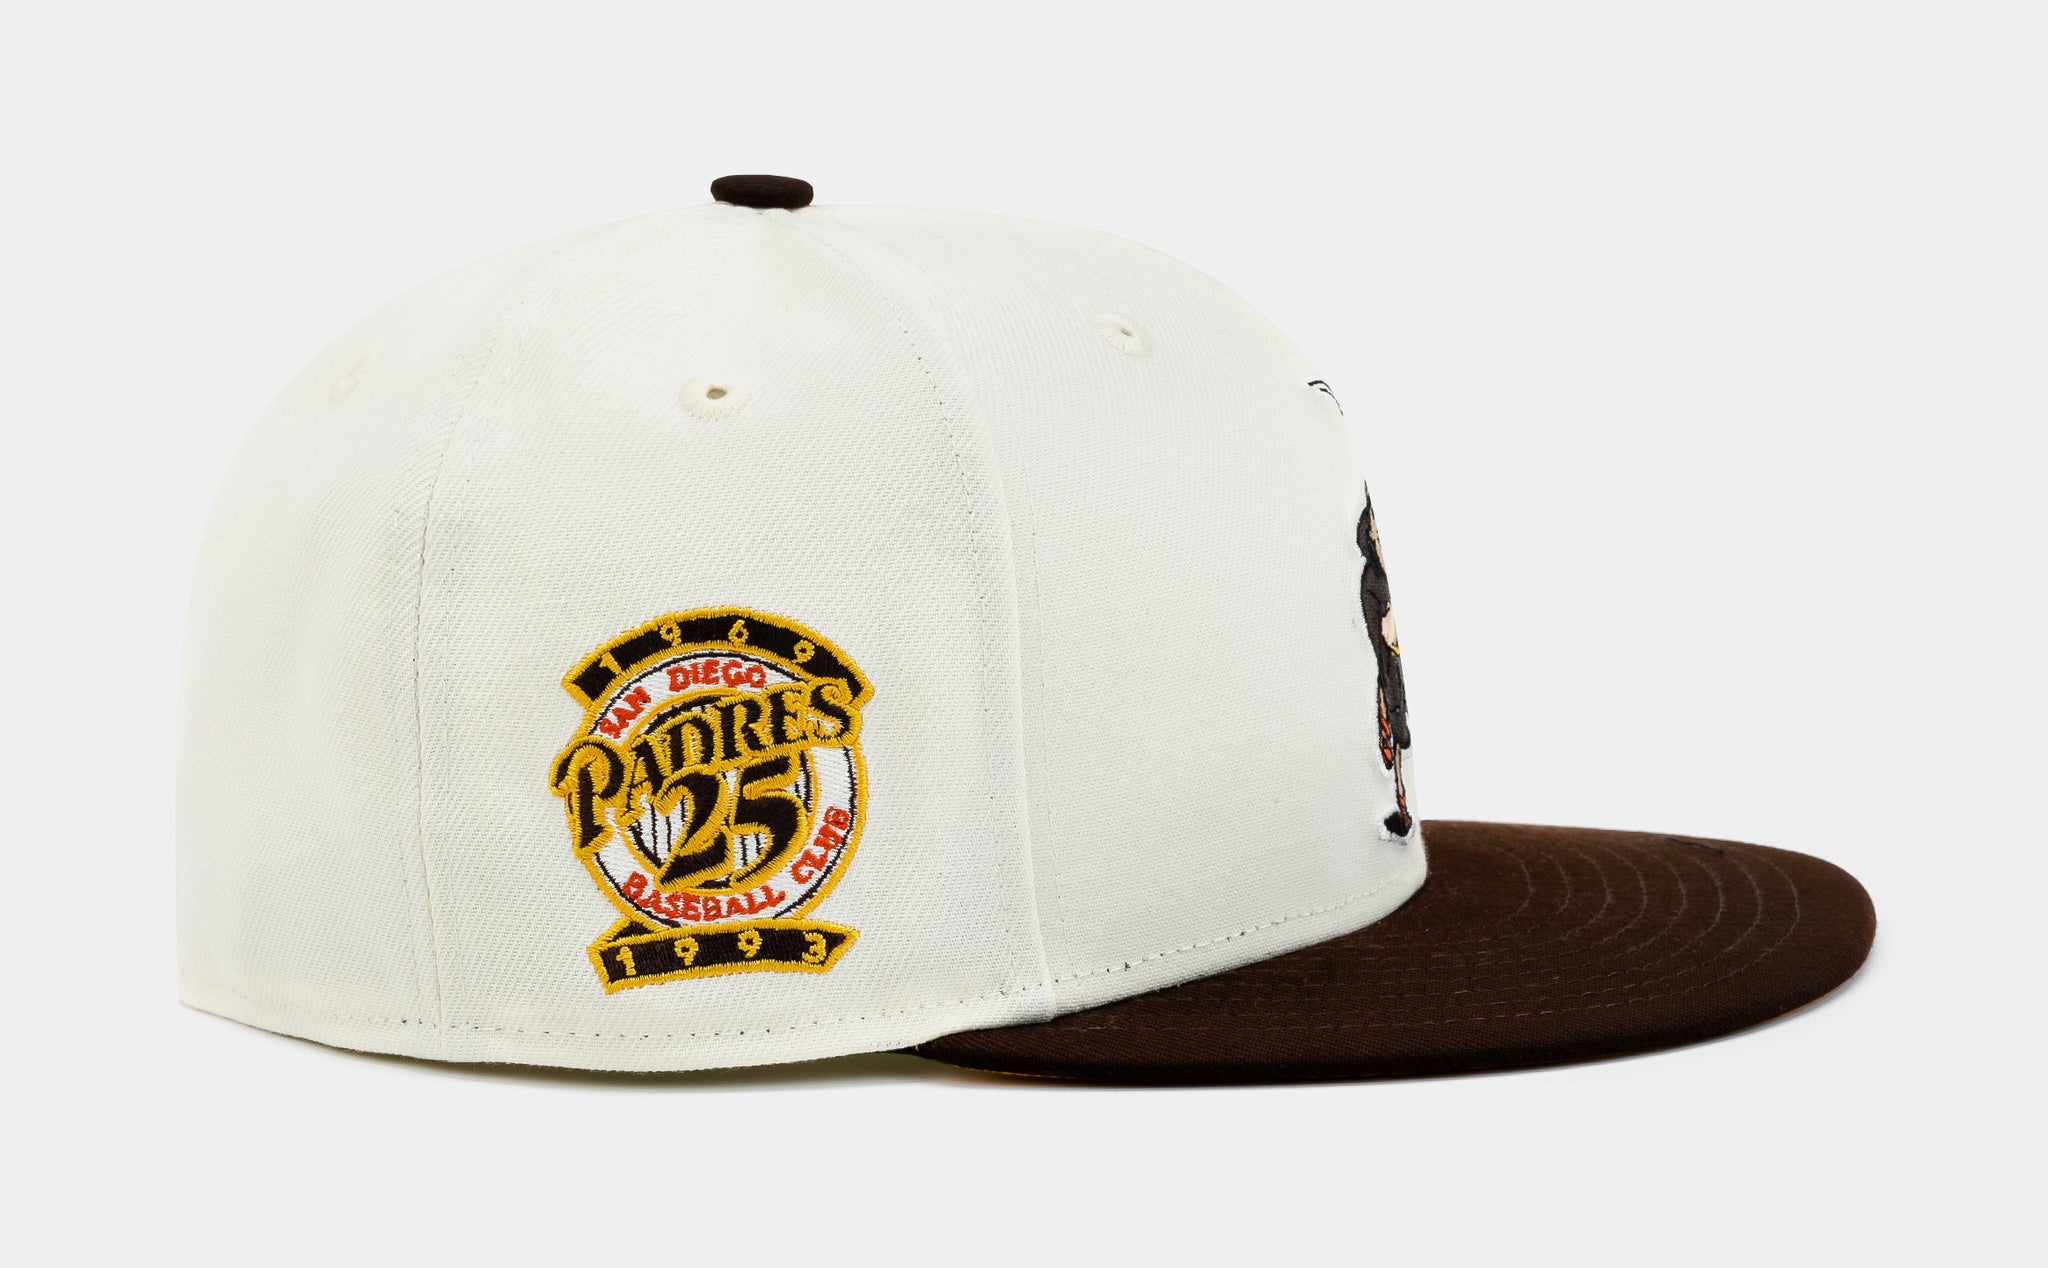 New Era Shoe Palace Exclusive San Diego Padres at The Park 59FIFTY Mens Fitted Hat (White/Brown)